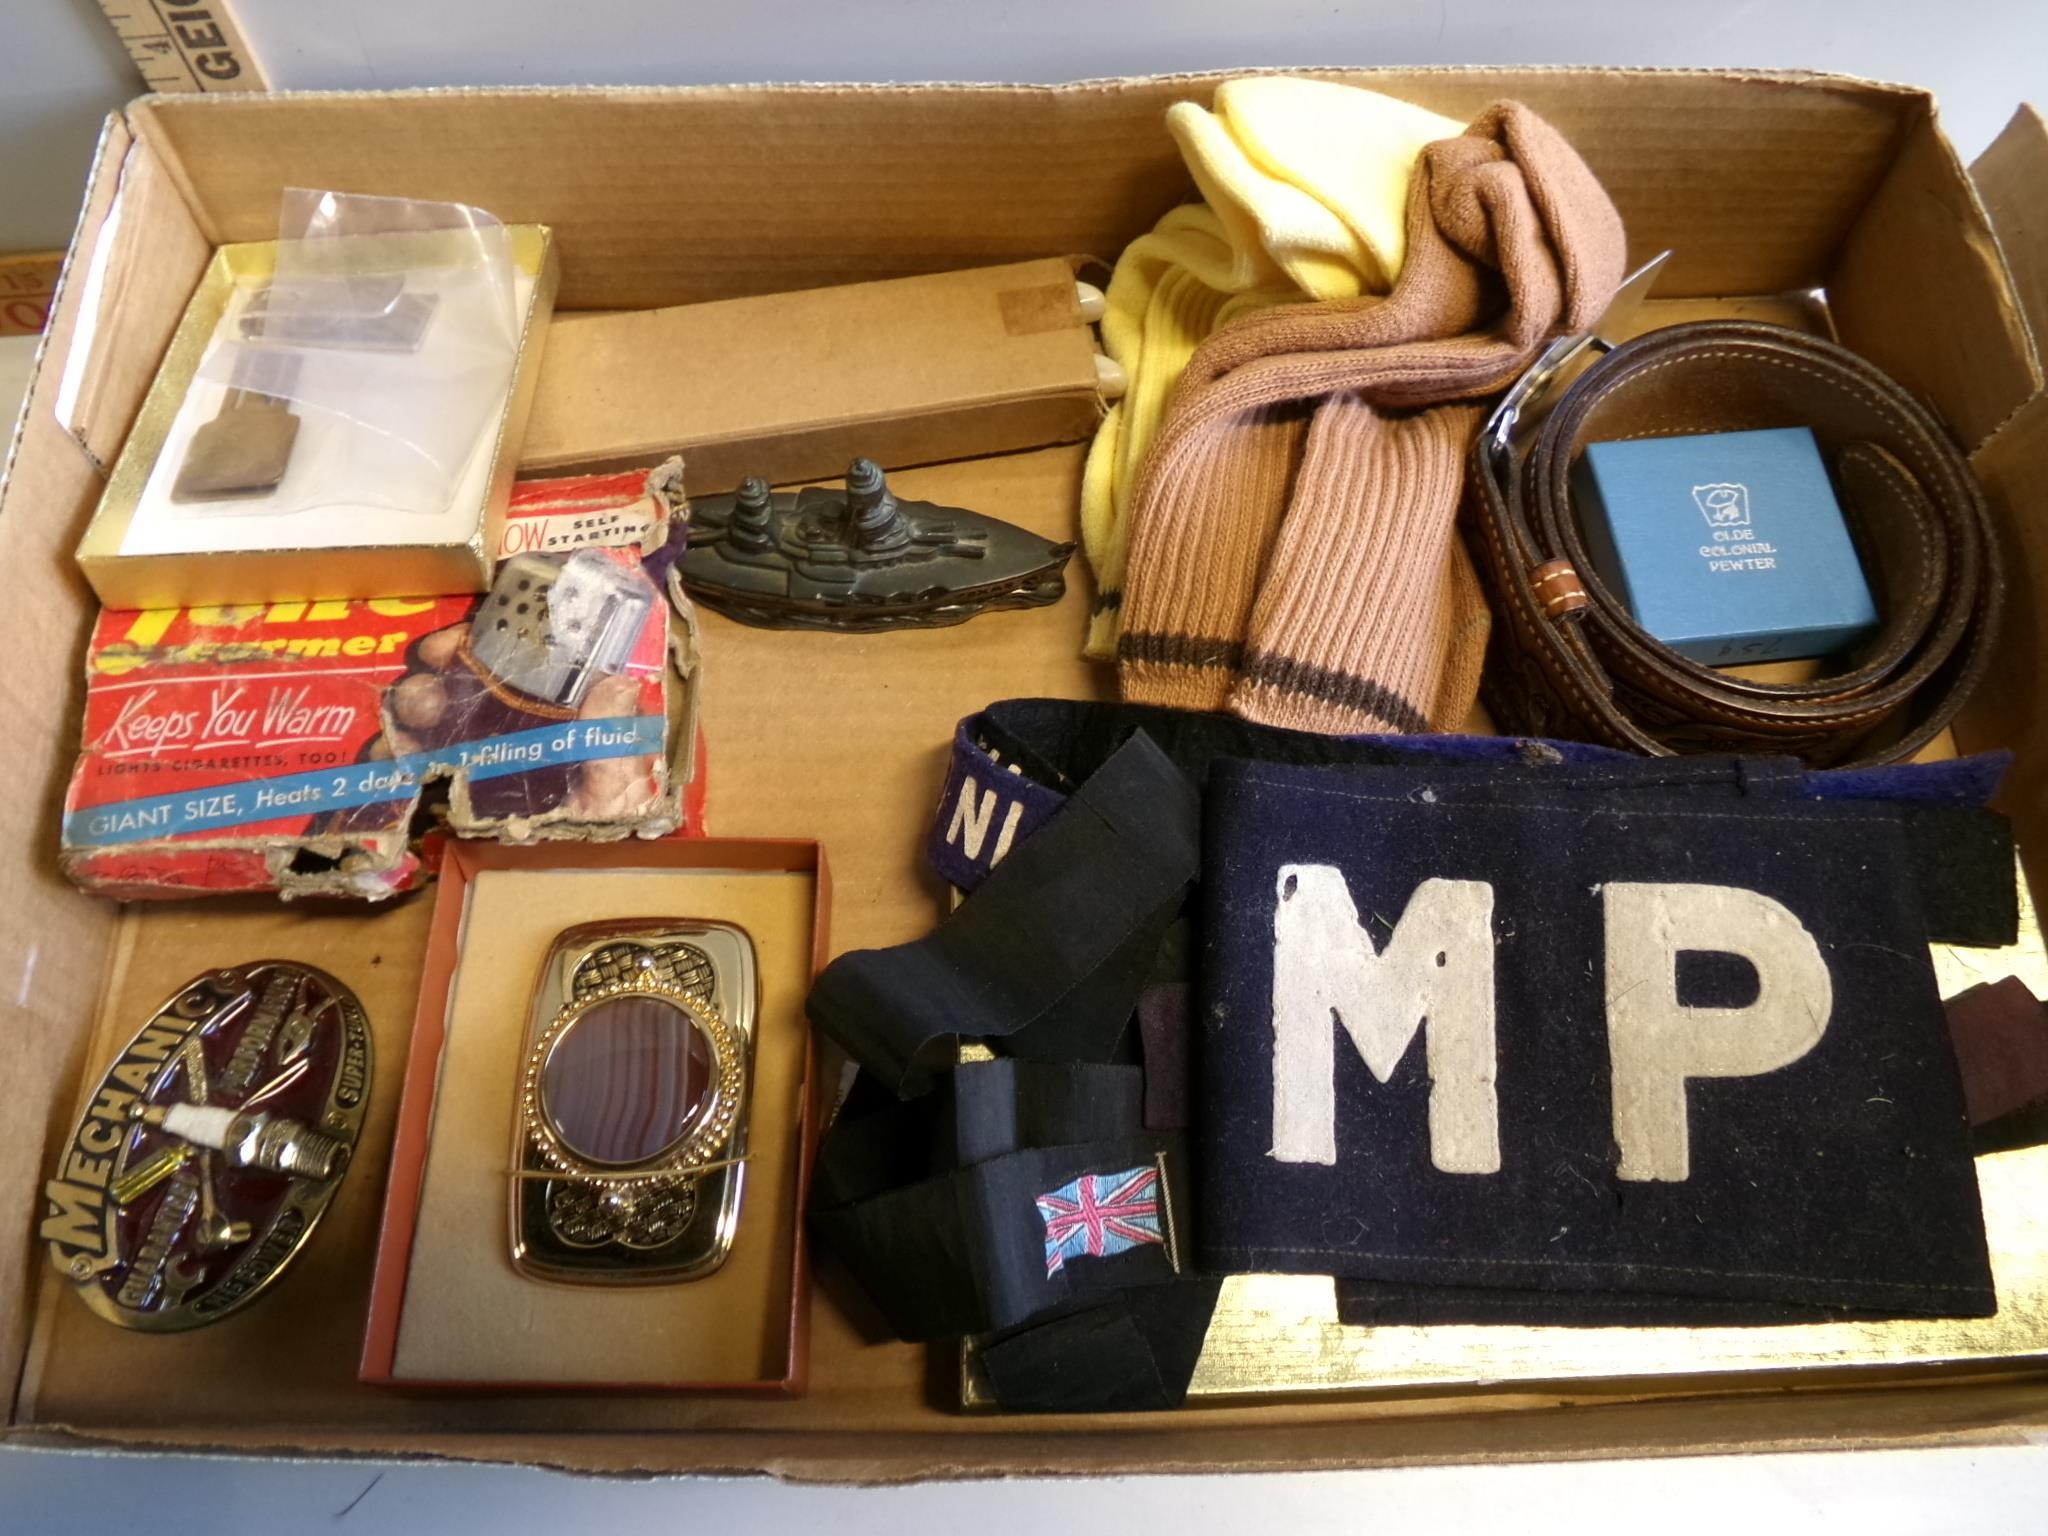 2 belt buckles, MP arm band, belt and other items